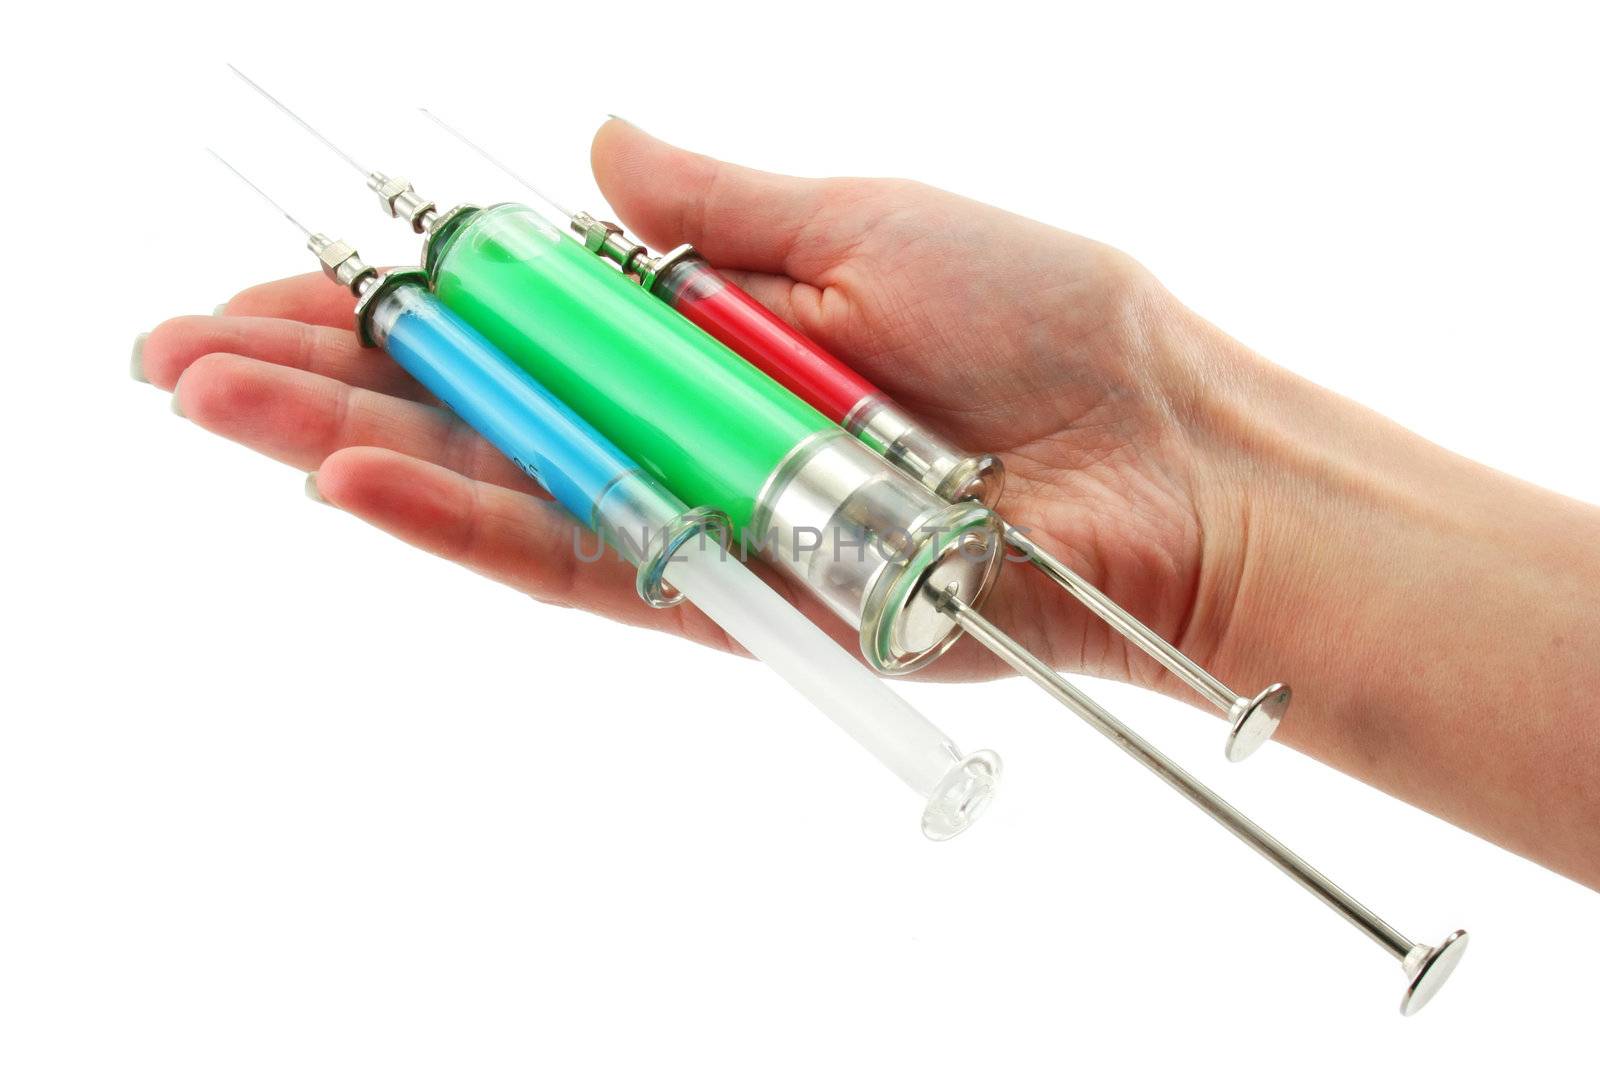 Three reusable syringes with acid substance in hands isolated on a white background